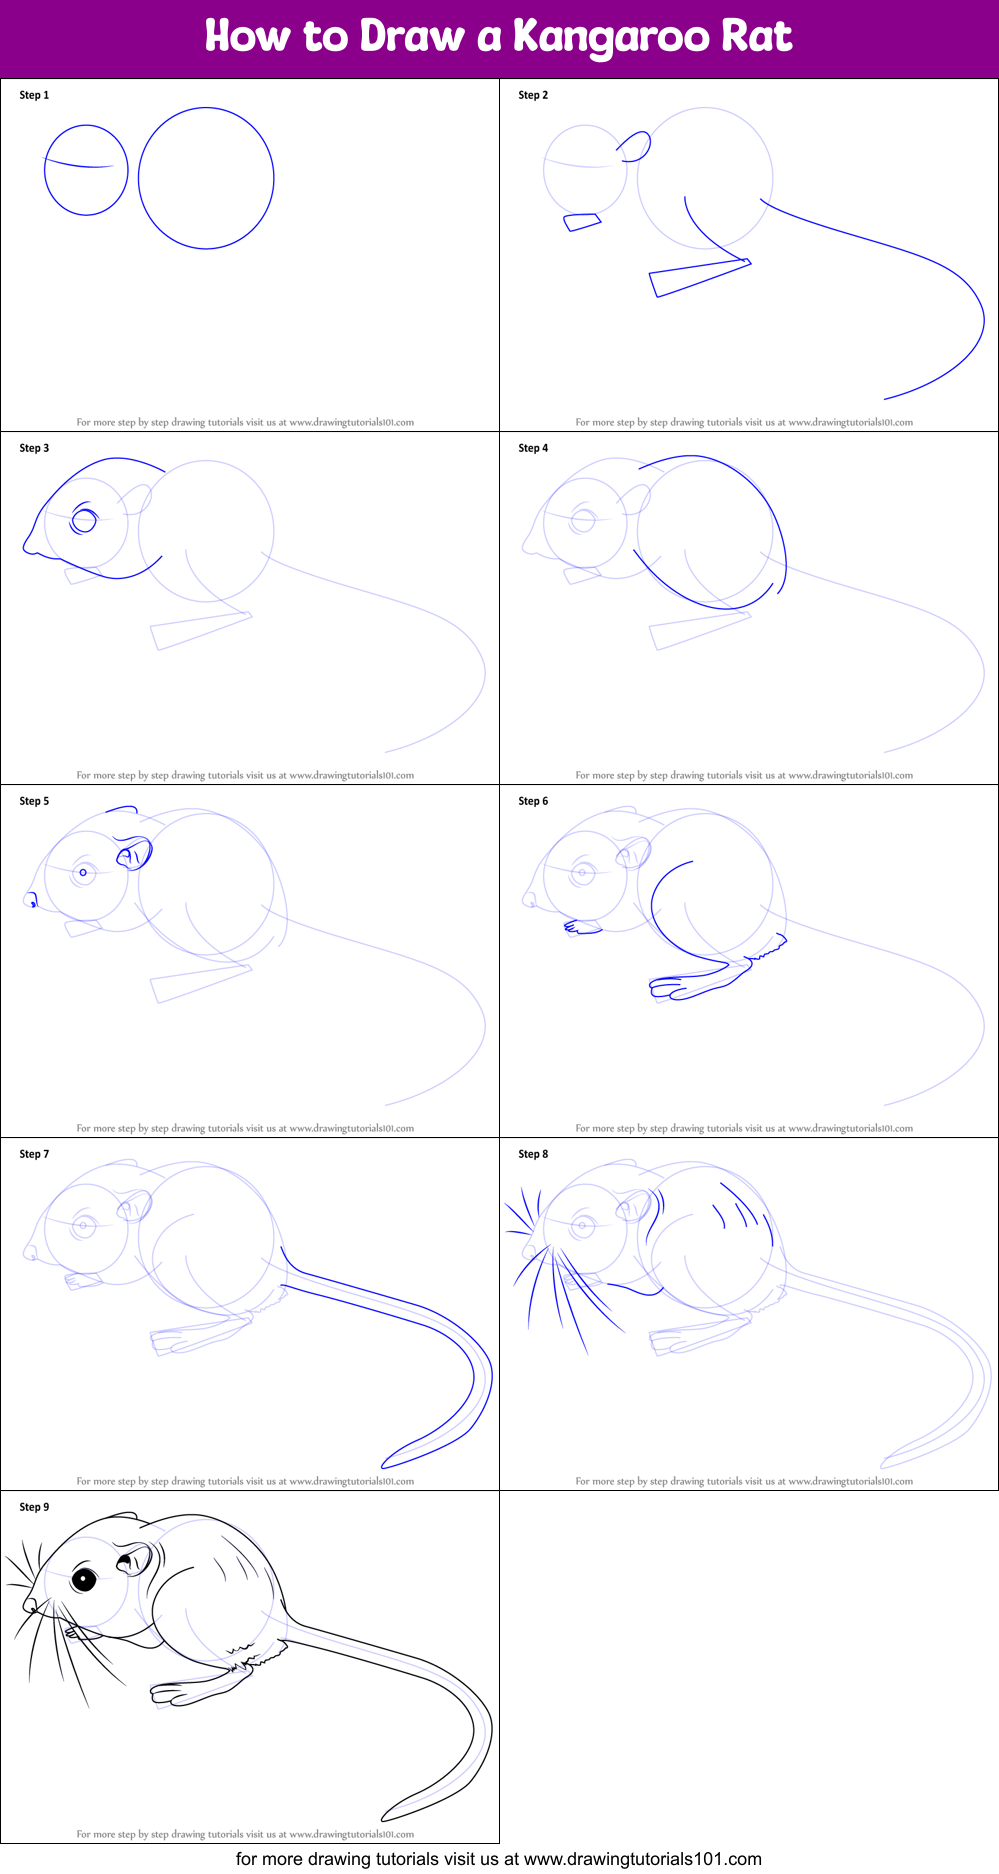 How to Draw a Kangaroo Rat (Rodents) Step by Step | DrawingTutorials101.com